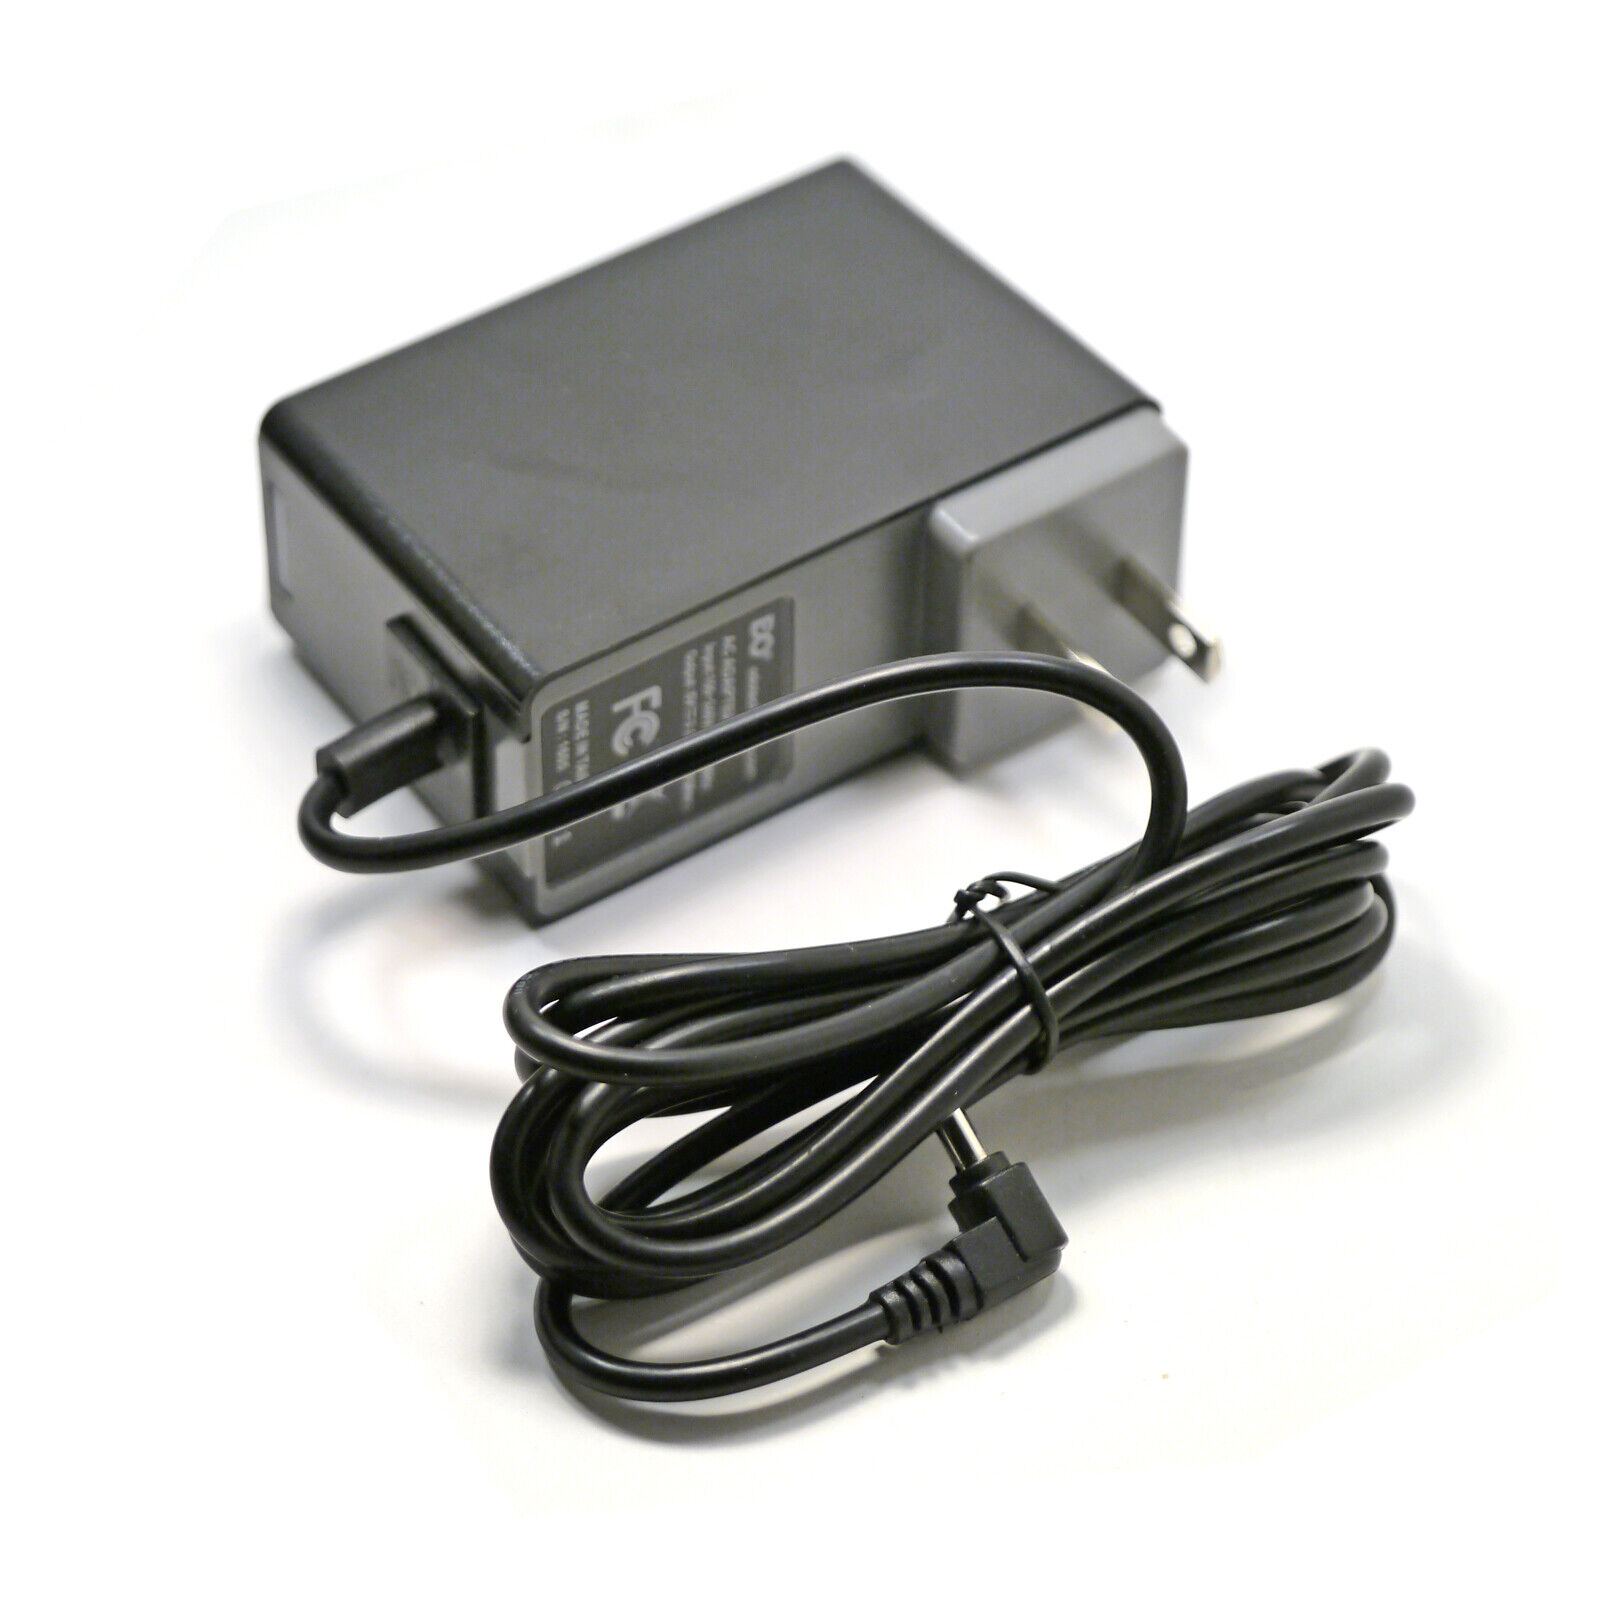 12V Wall Charger AC Power Supply for APOLOSIGN NJP1561P 15.6